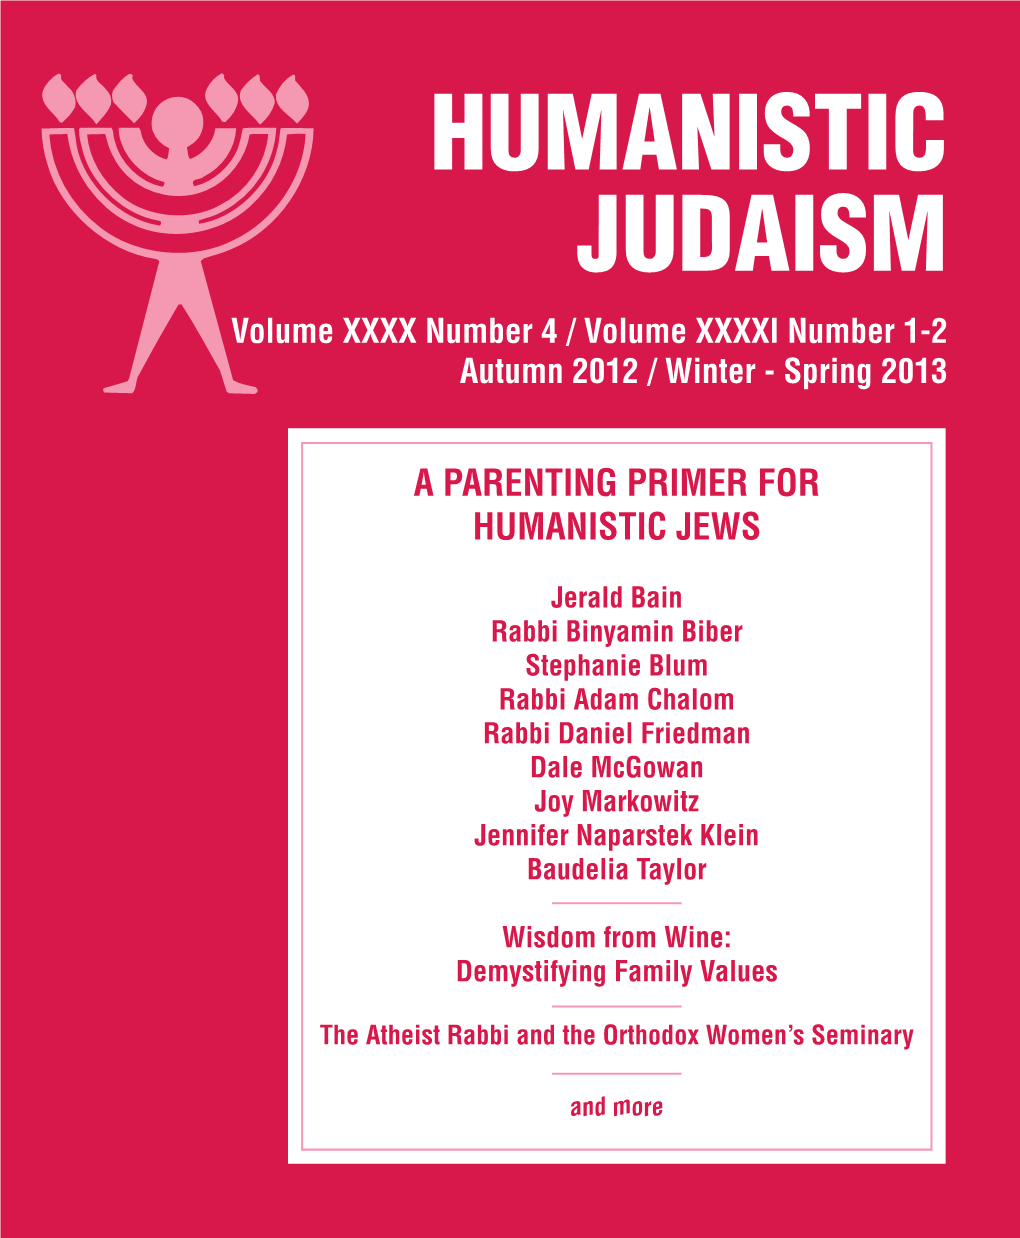 A Parenting Primer for Humanistic Jews